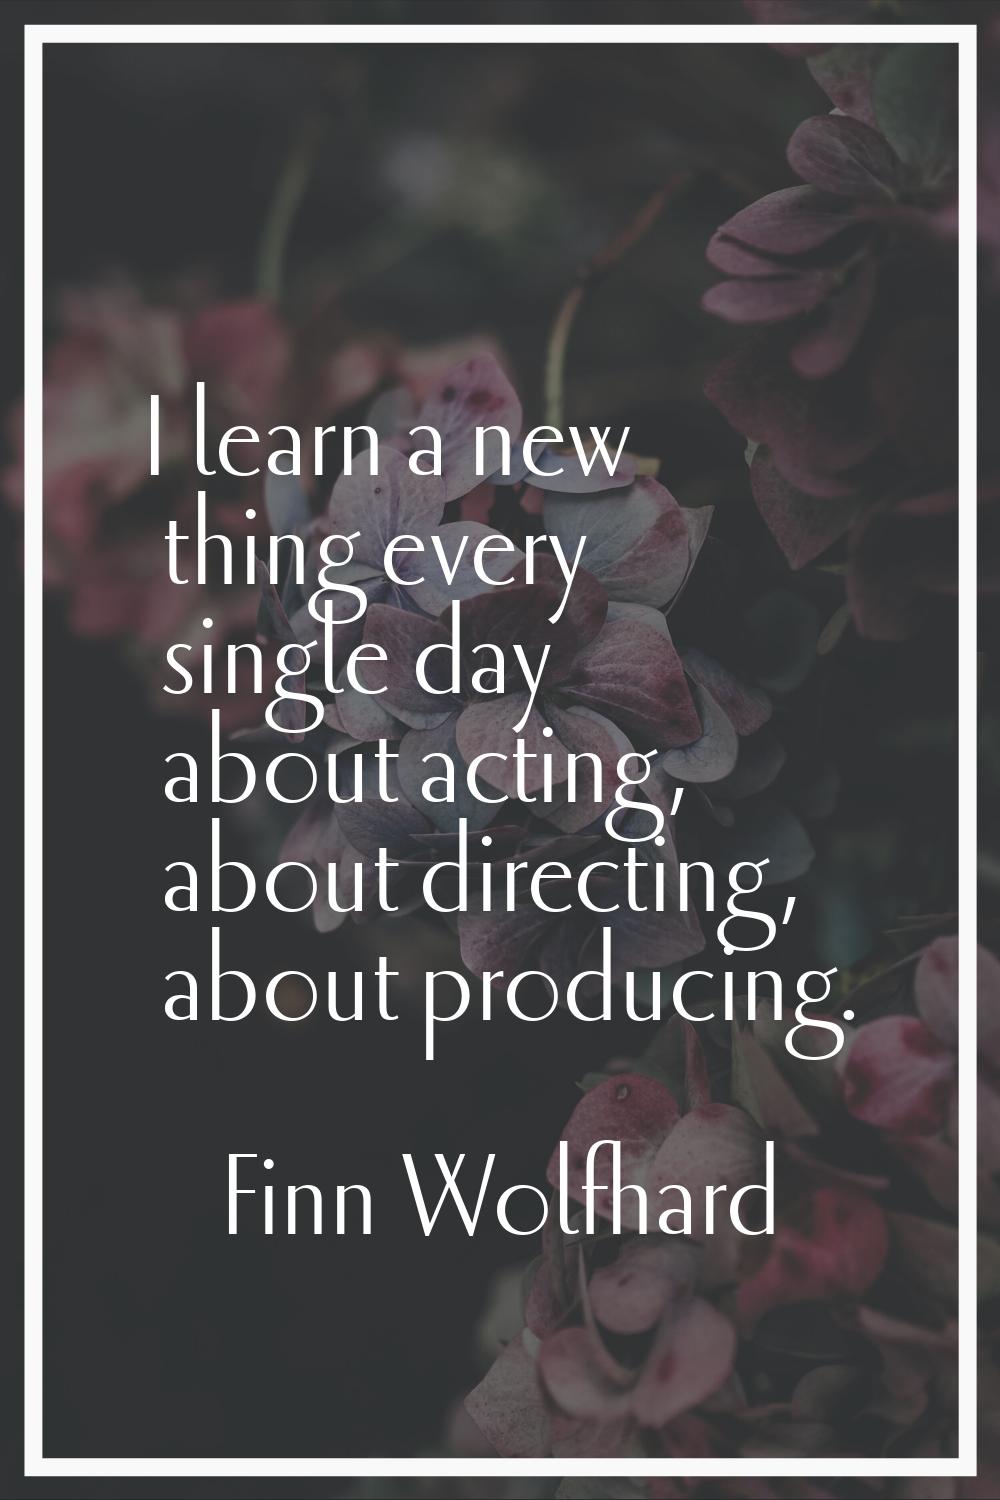 I learn a new thing every single day about acting, about directing, about producing.